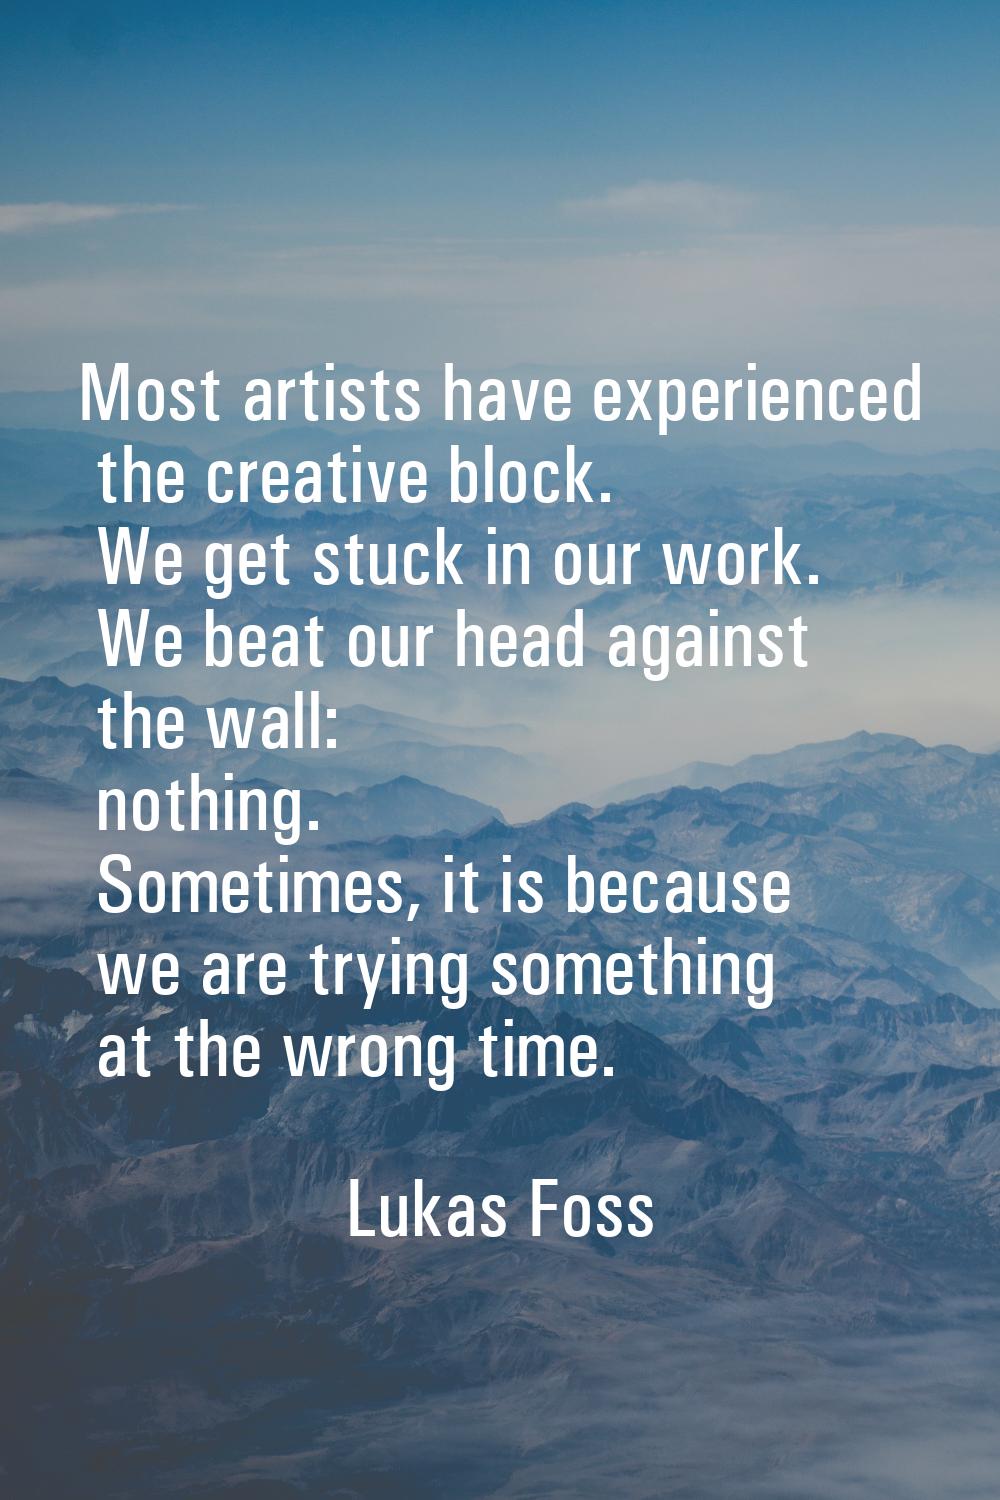 Most artists have experienced the creative block. We get stuck in our work. We beat our head agains